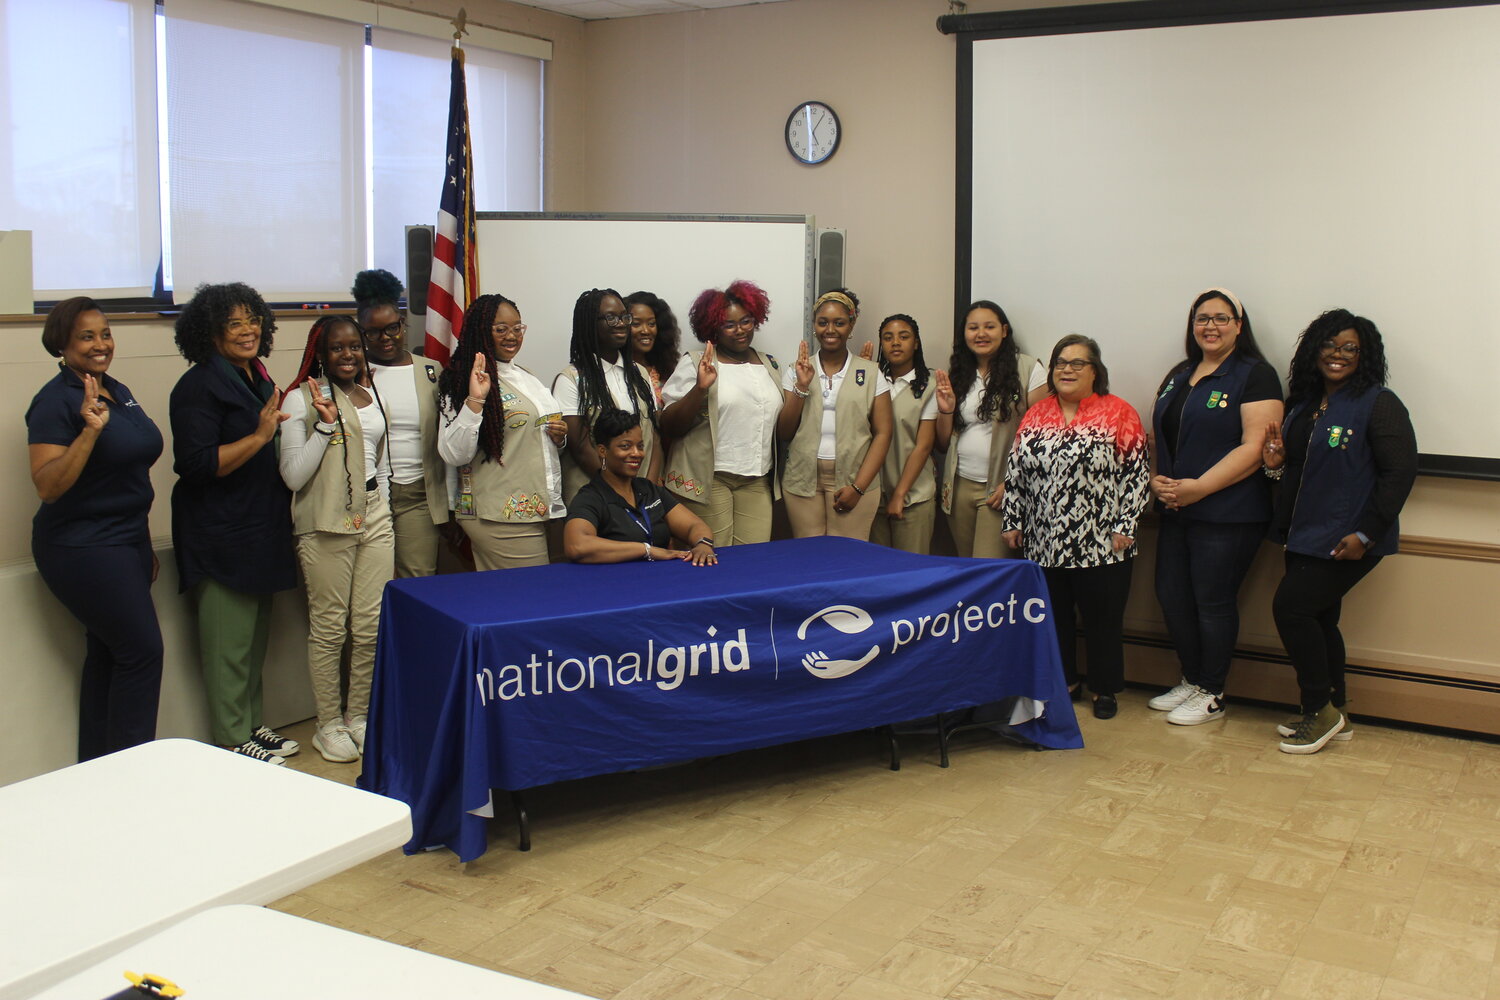 Girl Scouts of Nassau County and National Grid are partnering to empower young girls to excel in STEM fields and embrace energy conservation and sustainability. The Project C program, which encourages girls to engage in community work, has already enabled over 270 scouts to earn patches in four essential pillars of the initiative.